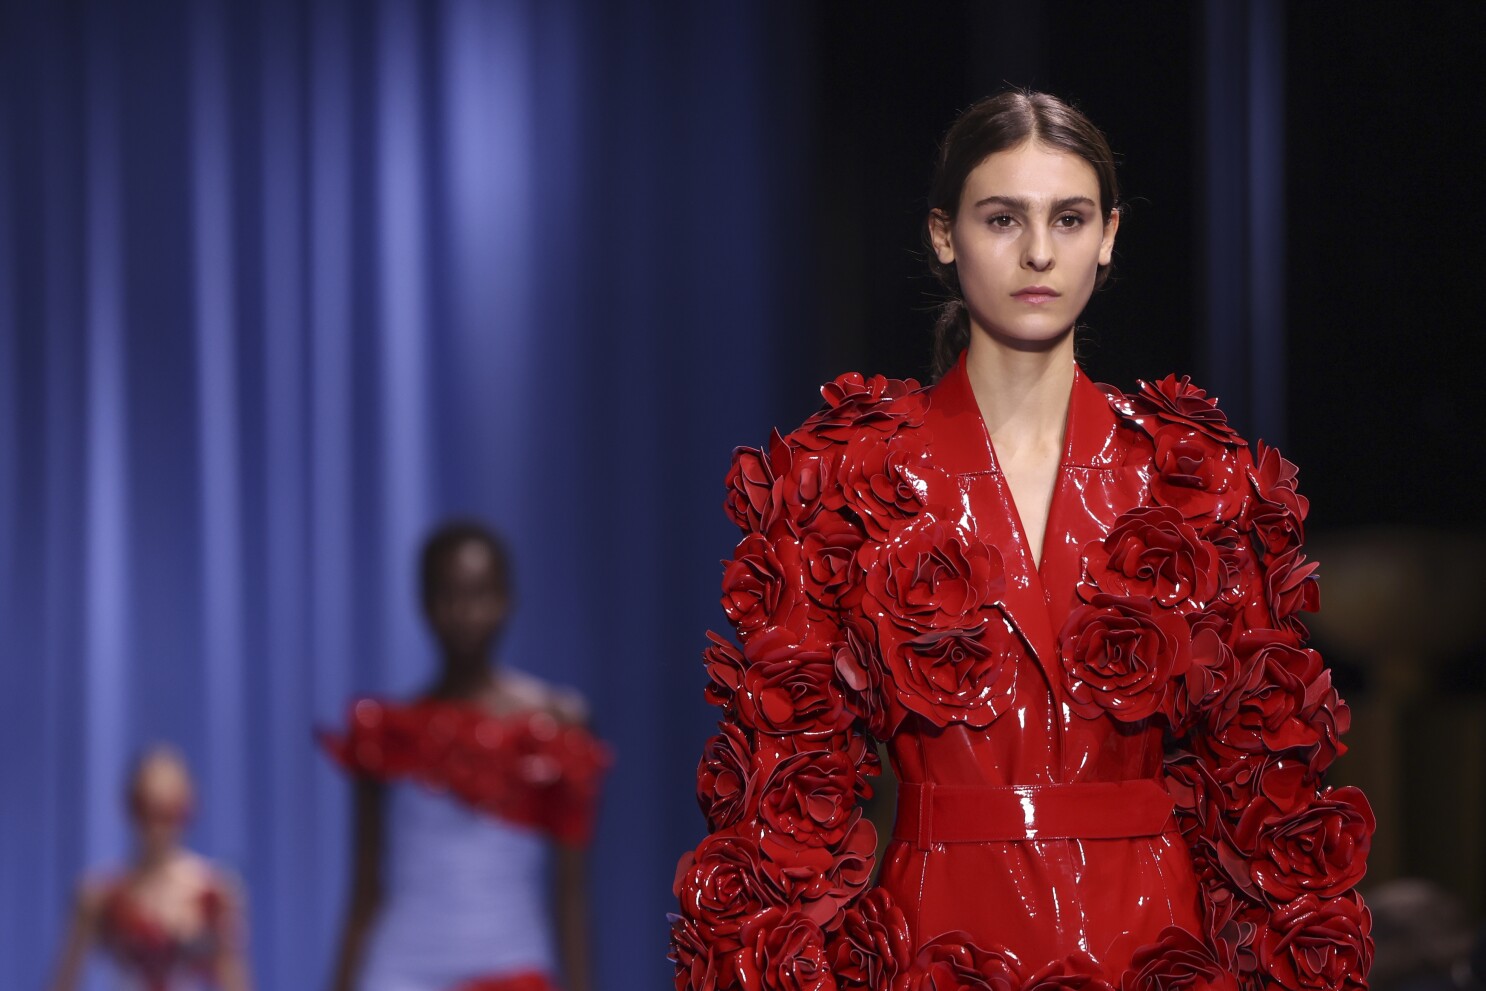 Following theft, Balmain shows defiance with flowers in rose-filled Paris  Fashion Week show